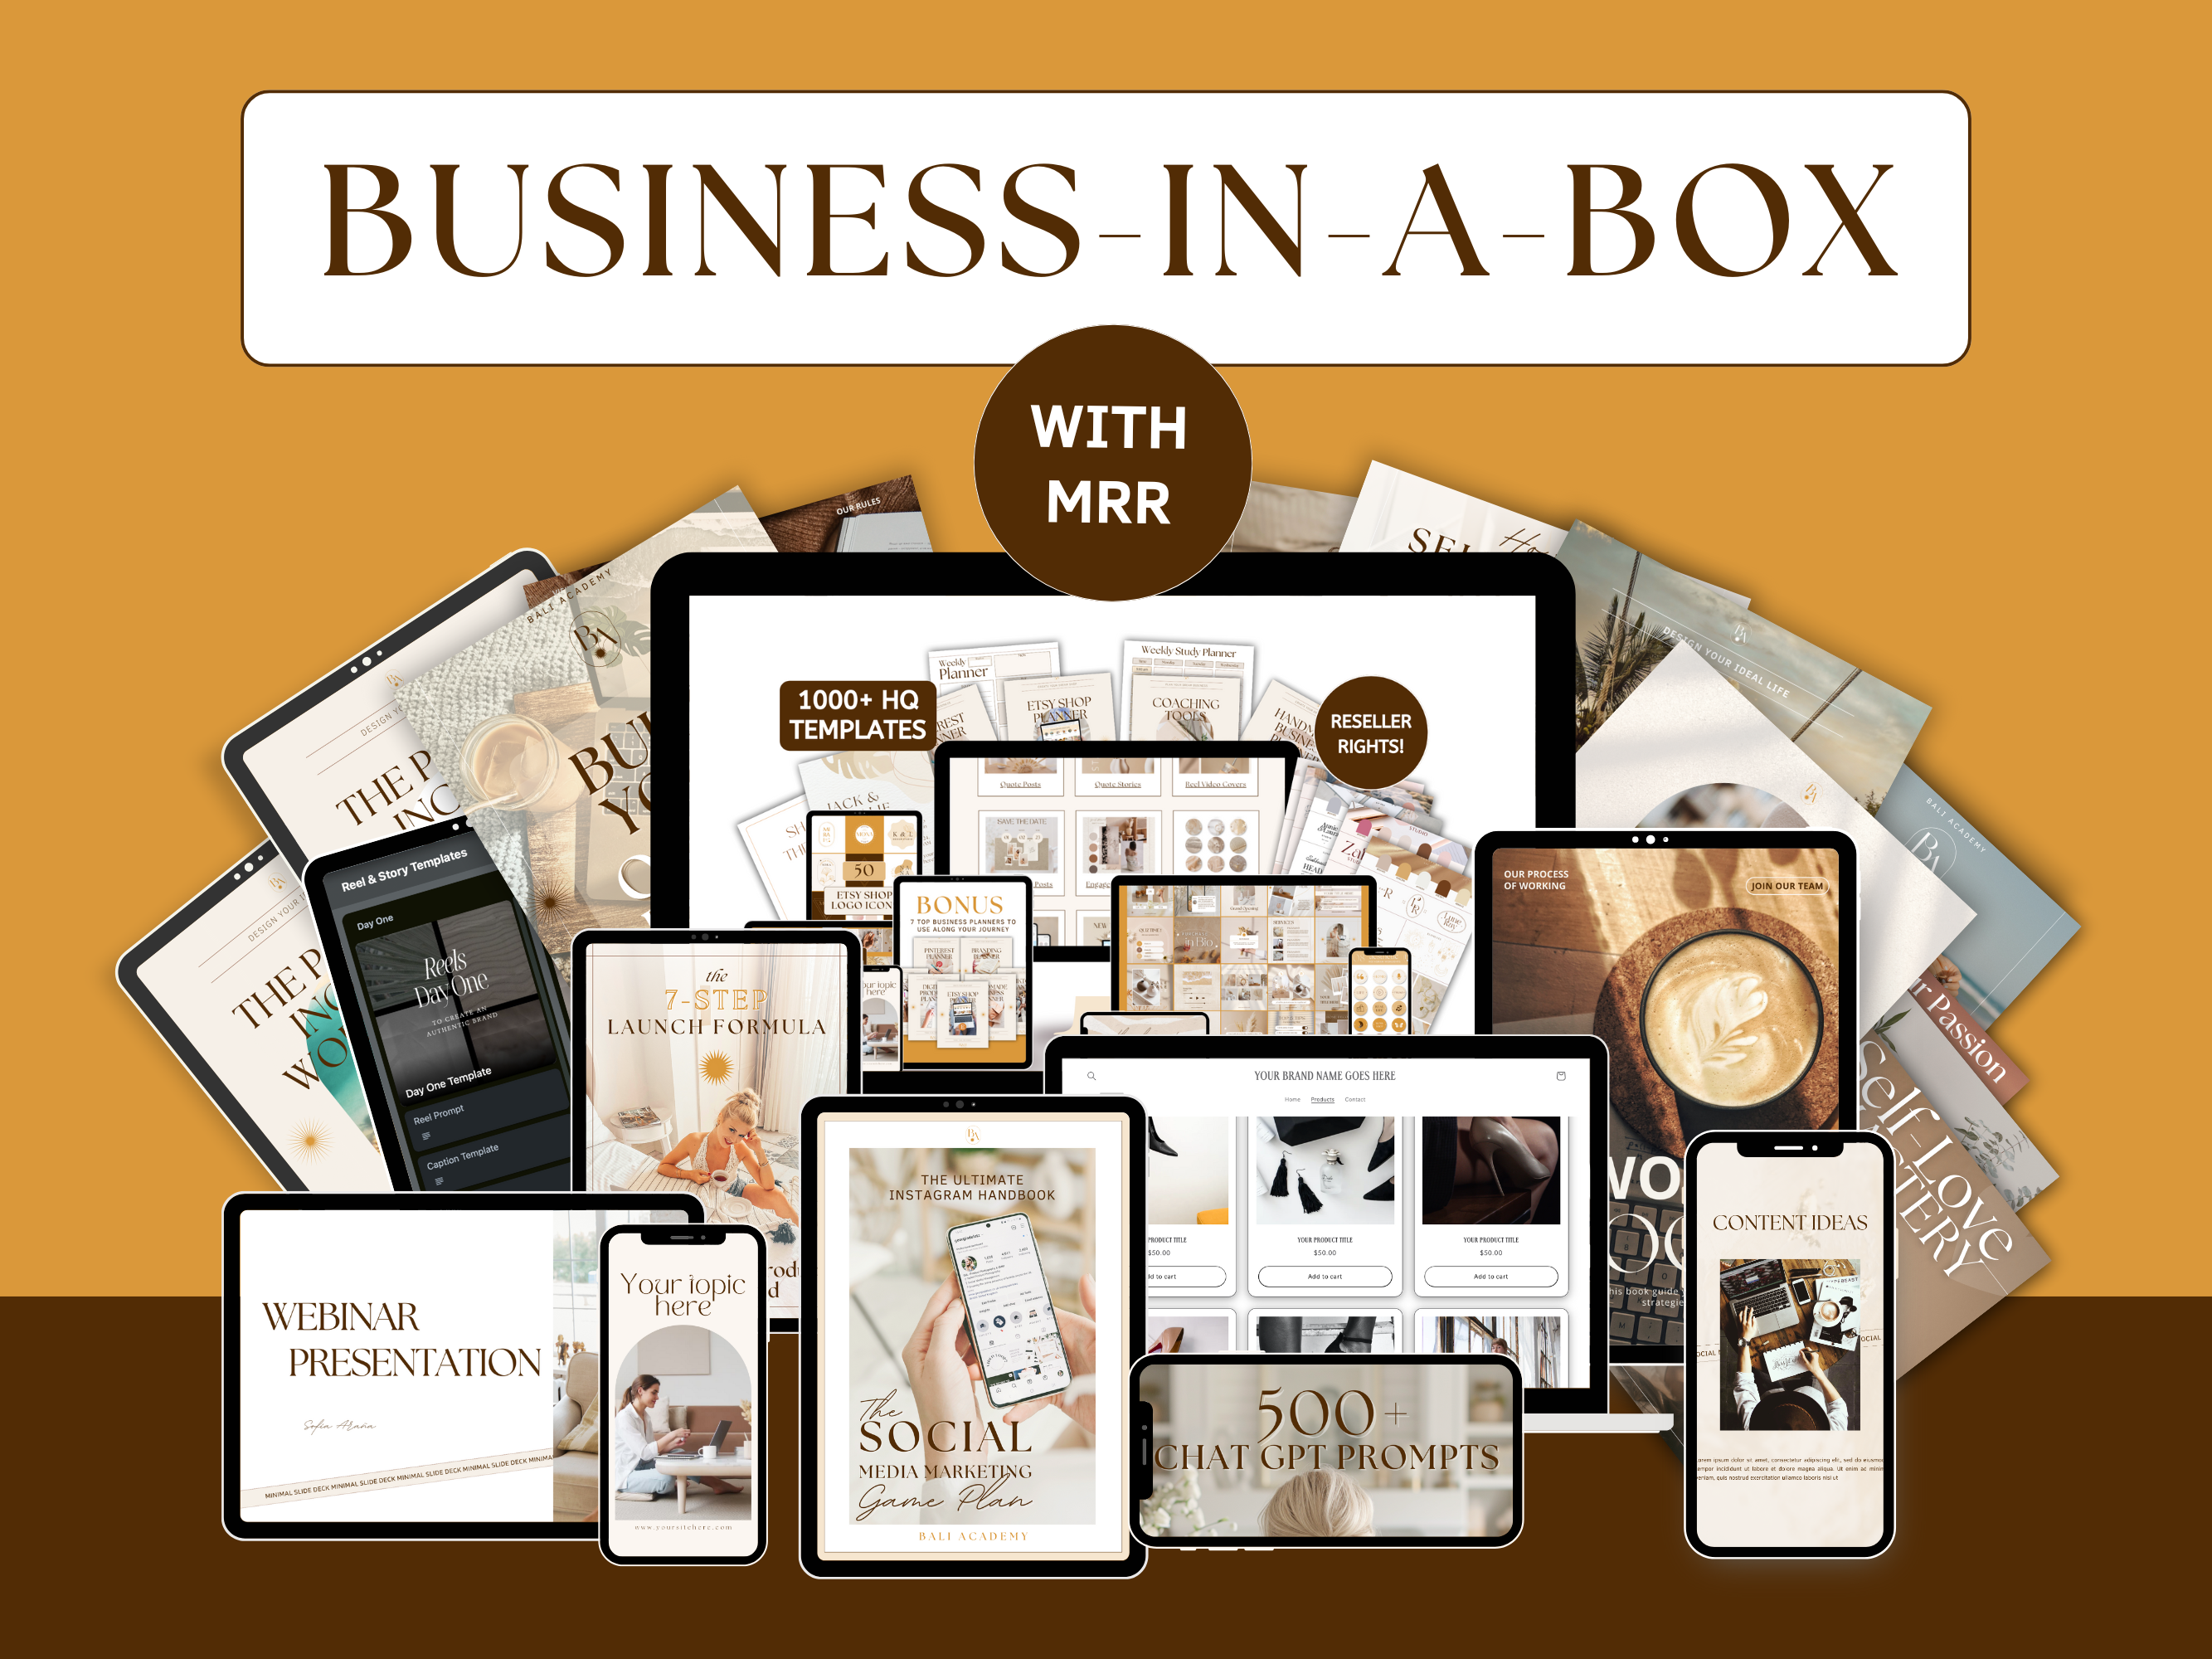 Digital Product Business-in-a-Box with MRR